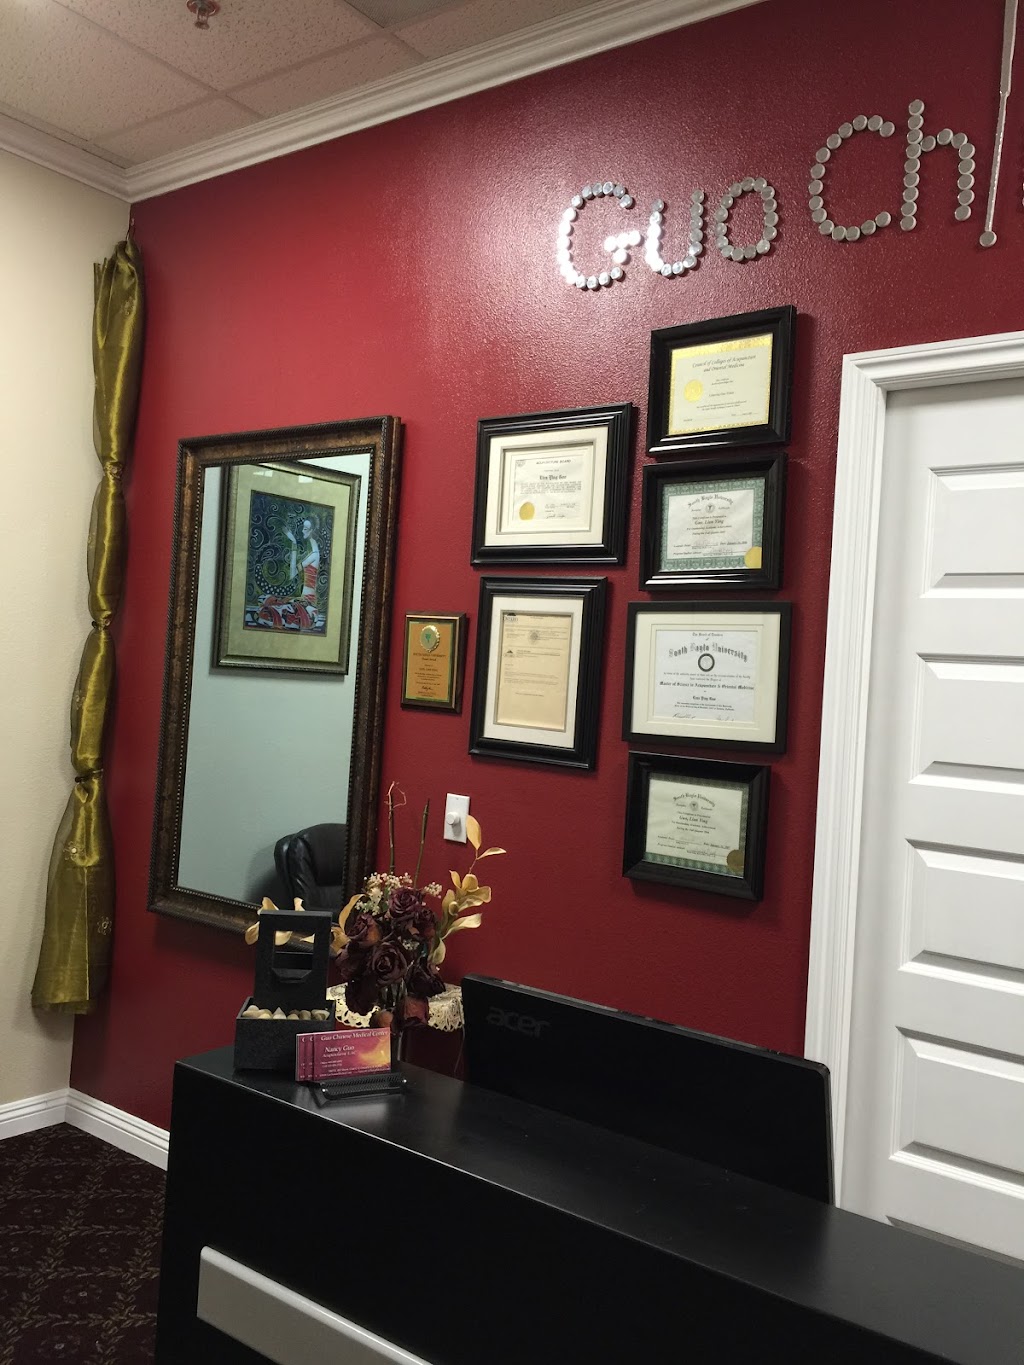 Guo Chinese Medical Center | 1865 E 4th St C-1, Ontario, CA 91764 | Phone: (909) 988-4089